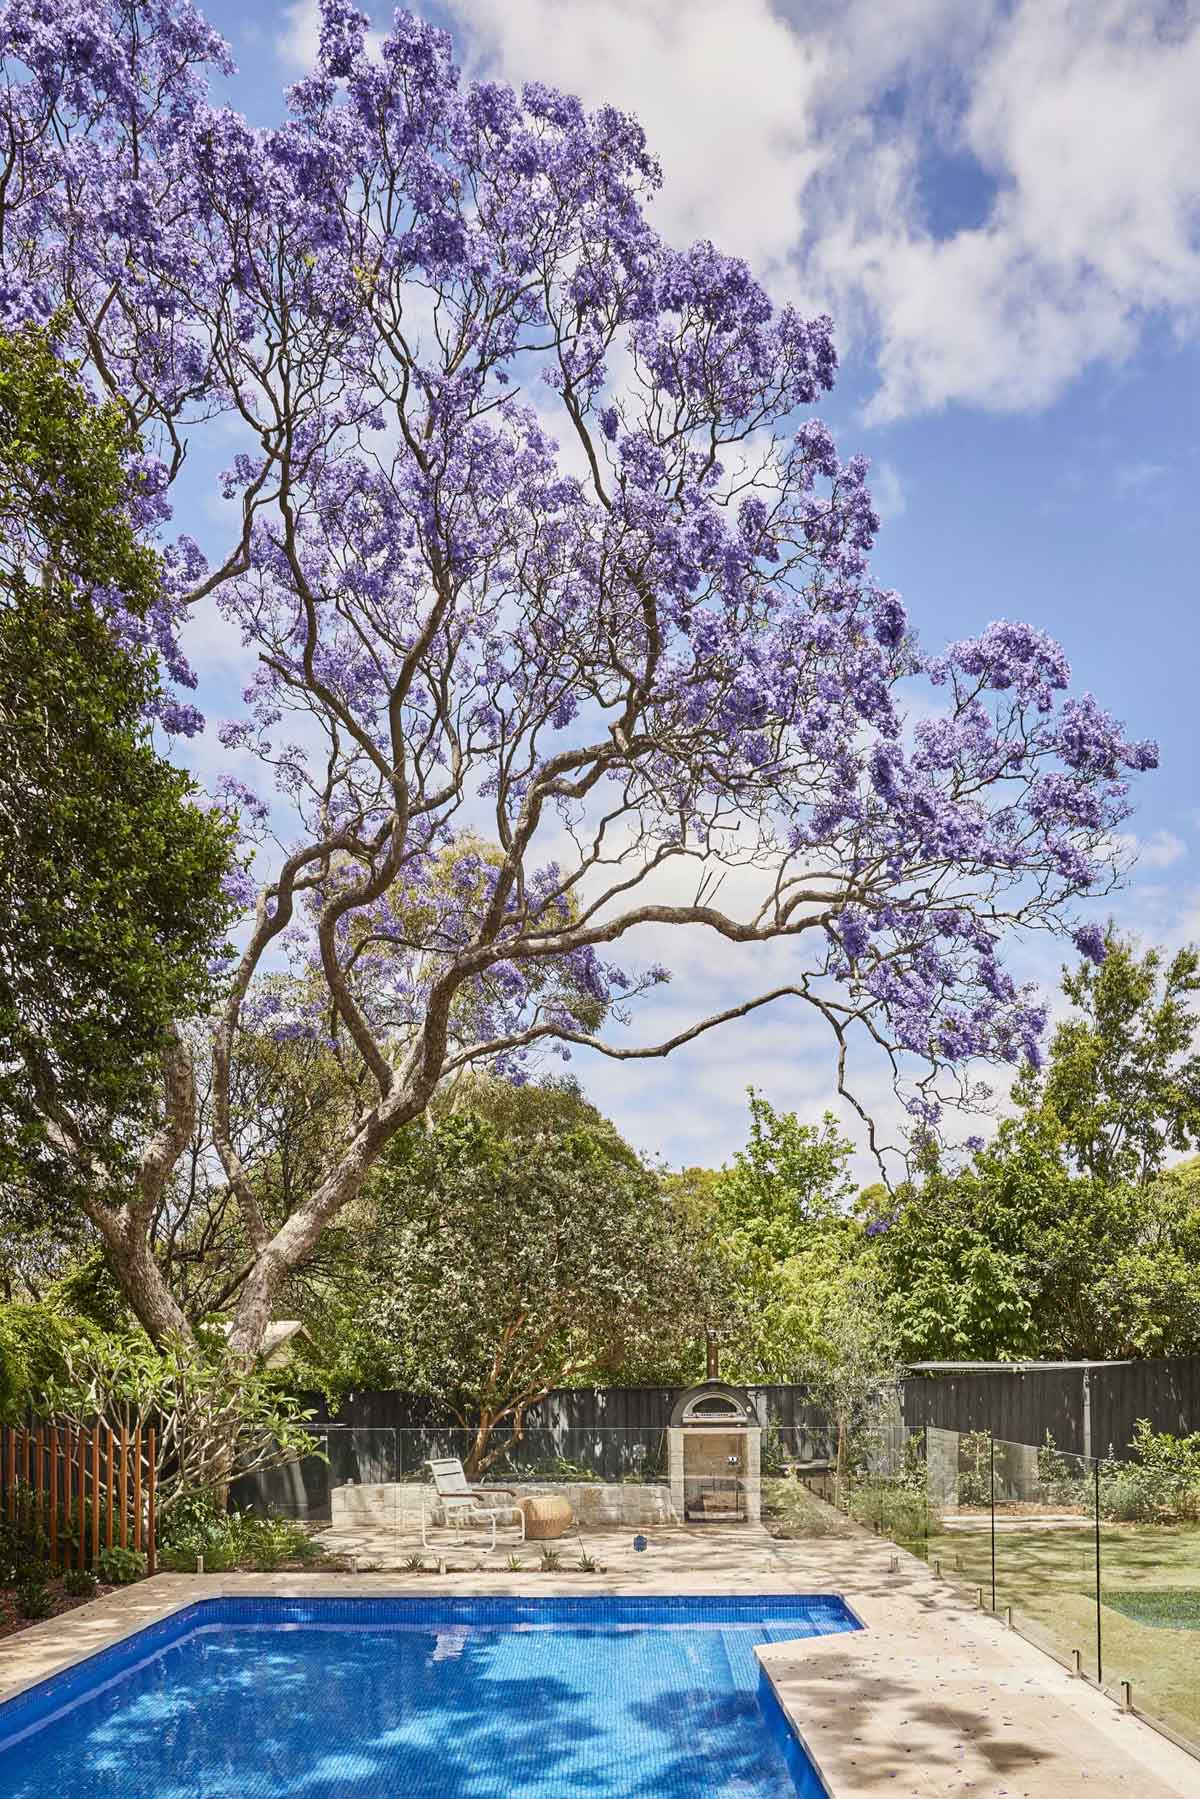 At the rear of the home, there's a pergola that extends the living spaces and provides a connection with the backyard and swimming pool, as well as a view of the Wisteria tree with its purple flowers.